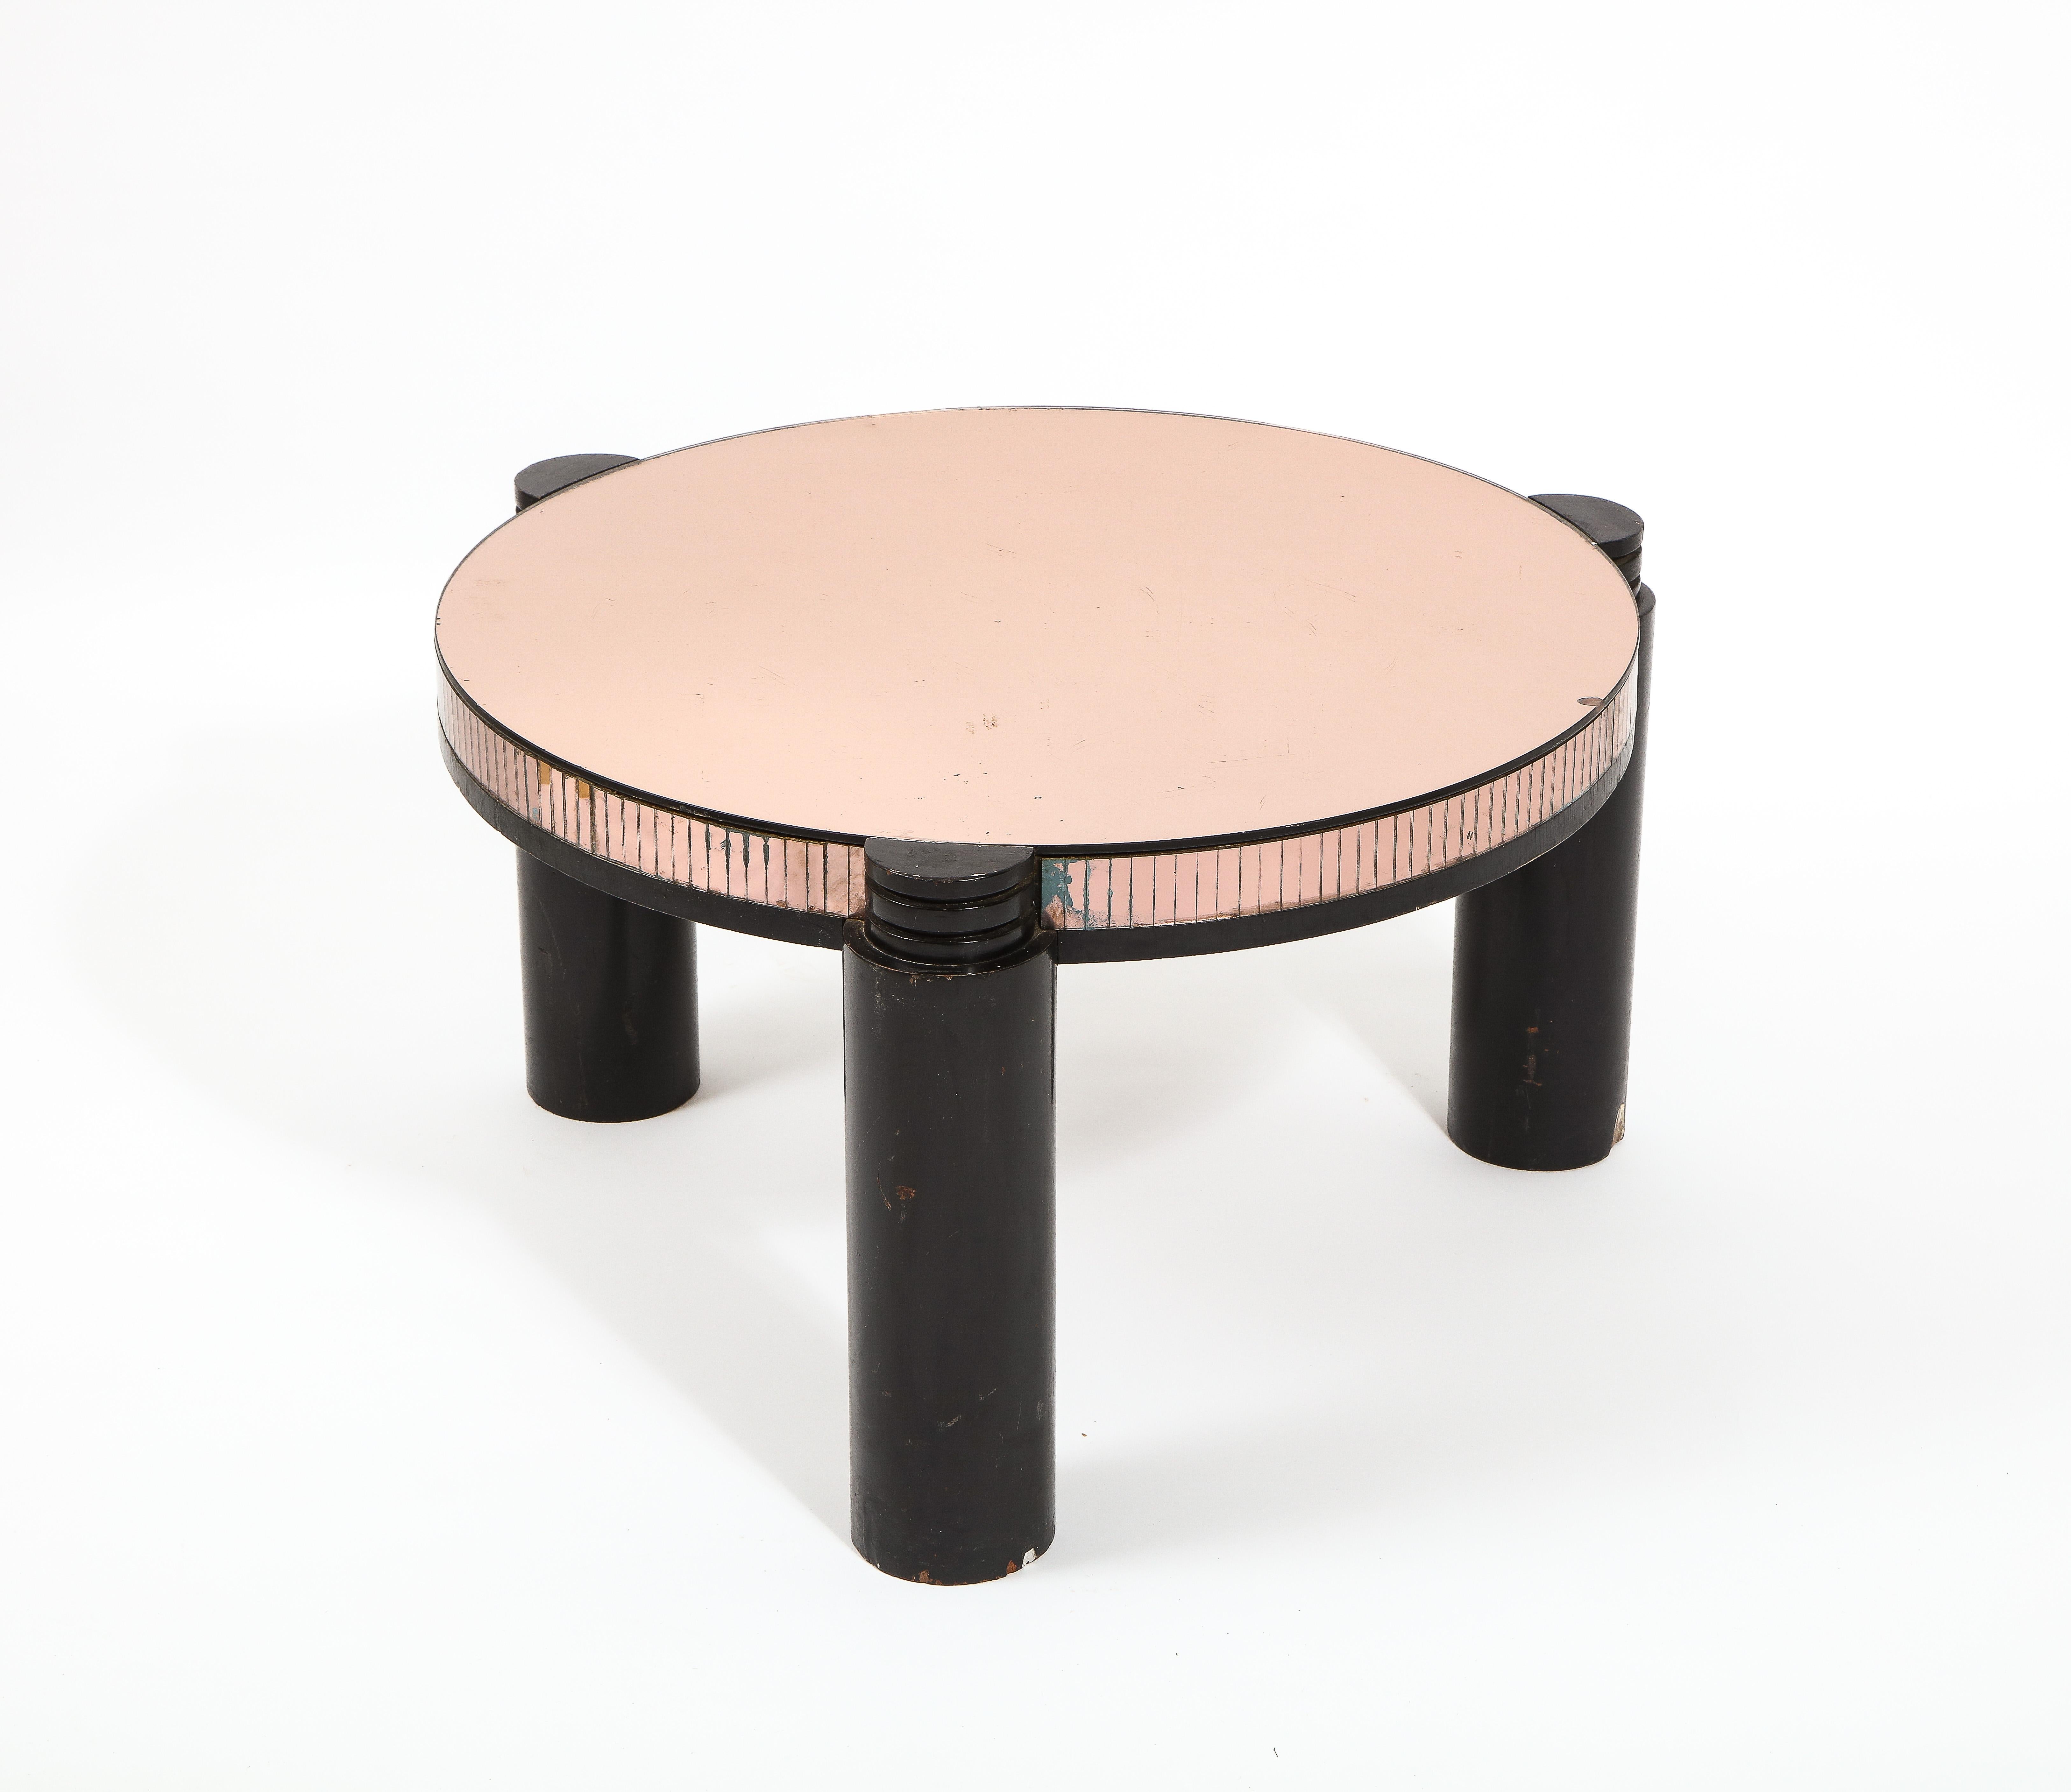 Black Ebonized & Pink Mirror Round Deco Style Cocktail Table, France 1940's For Sale 6